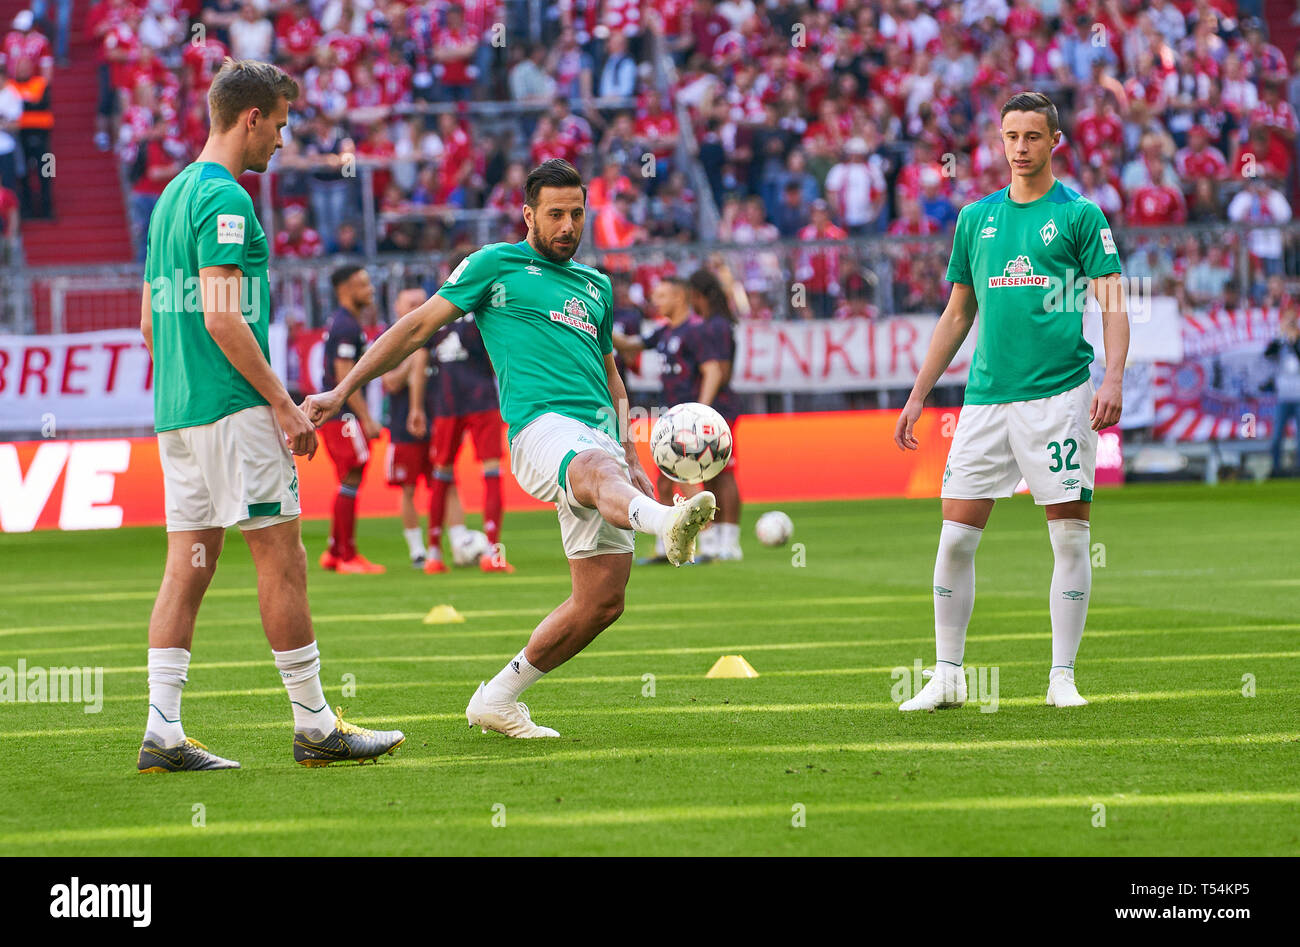 Munich, Germany. 20th Apr, 2019. Claudio PIZARRO, BRE 4 Yuya OSAKO, BRE 8 Sebastian LANGKAMP, BRE 15 Marco FRIEDL, BRE 32 Gymnastics, stretching, warming up, warm-up, preparation for the game,   FC BAYERN MUNICH - SV WERDER BREMEN 1-0  - DFL REGULATIONS PROHIBIT ANY USE OF PHOTOGRAPHS as IMAGE SEQUENCES and/or QUASI-VIDEO -  1.German Soccer League , Munich, April 20, 2019  Season 2018/2019, matchday 30, FCB, München, © Peter Schatz / Alamy Live News Credit: Peter Schatz/Alamy Live News Stock Photo